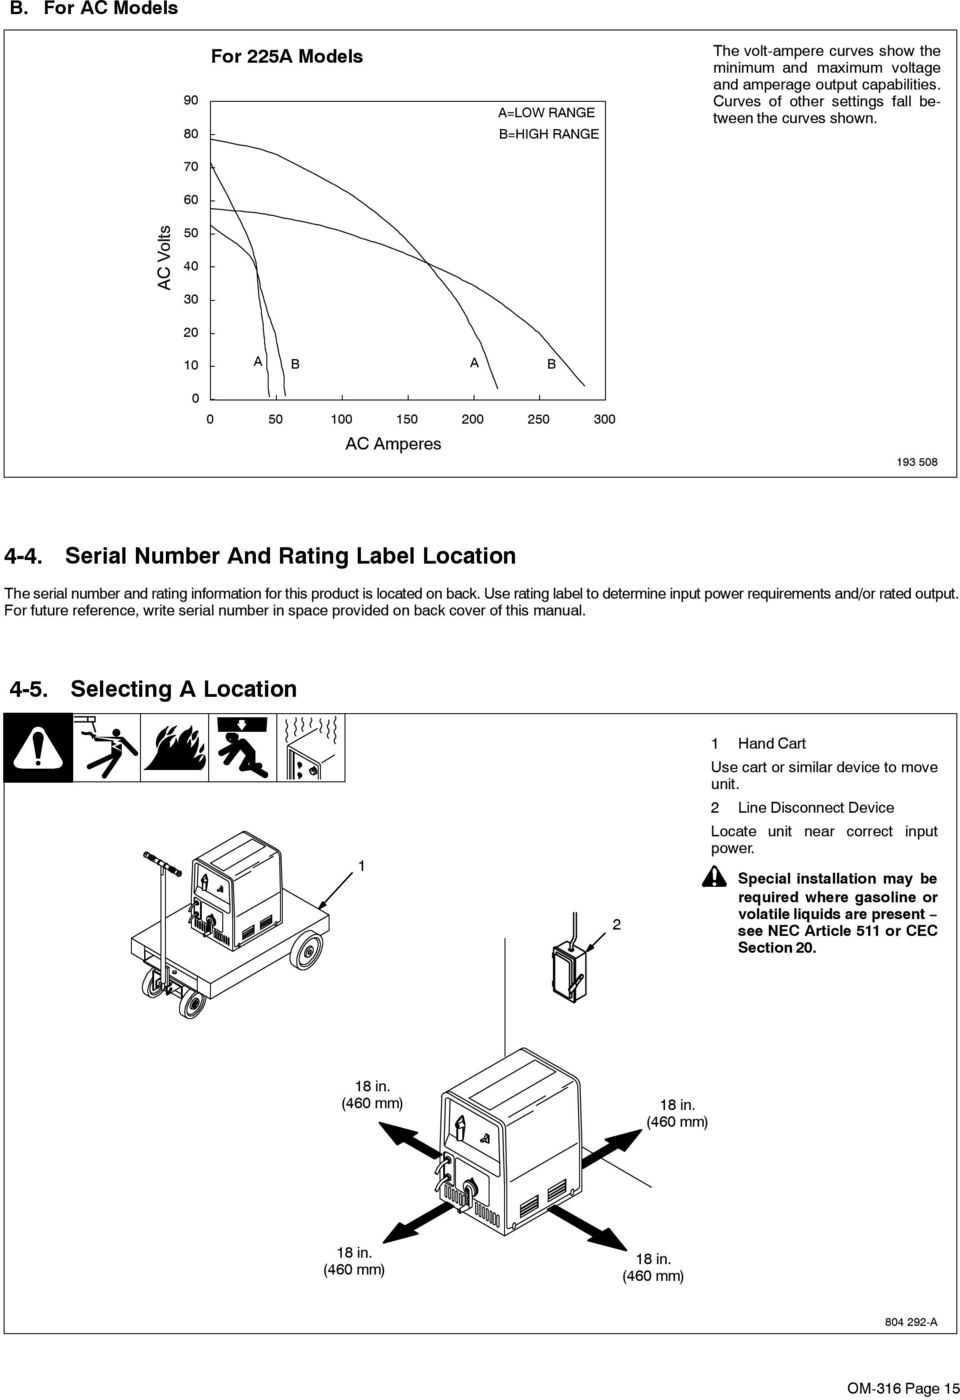 Serial Number And Rating Label Location The serial number and rating information for this product is located on back. Use rating label to determine input power requirements and/or rated output.